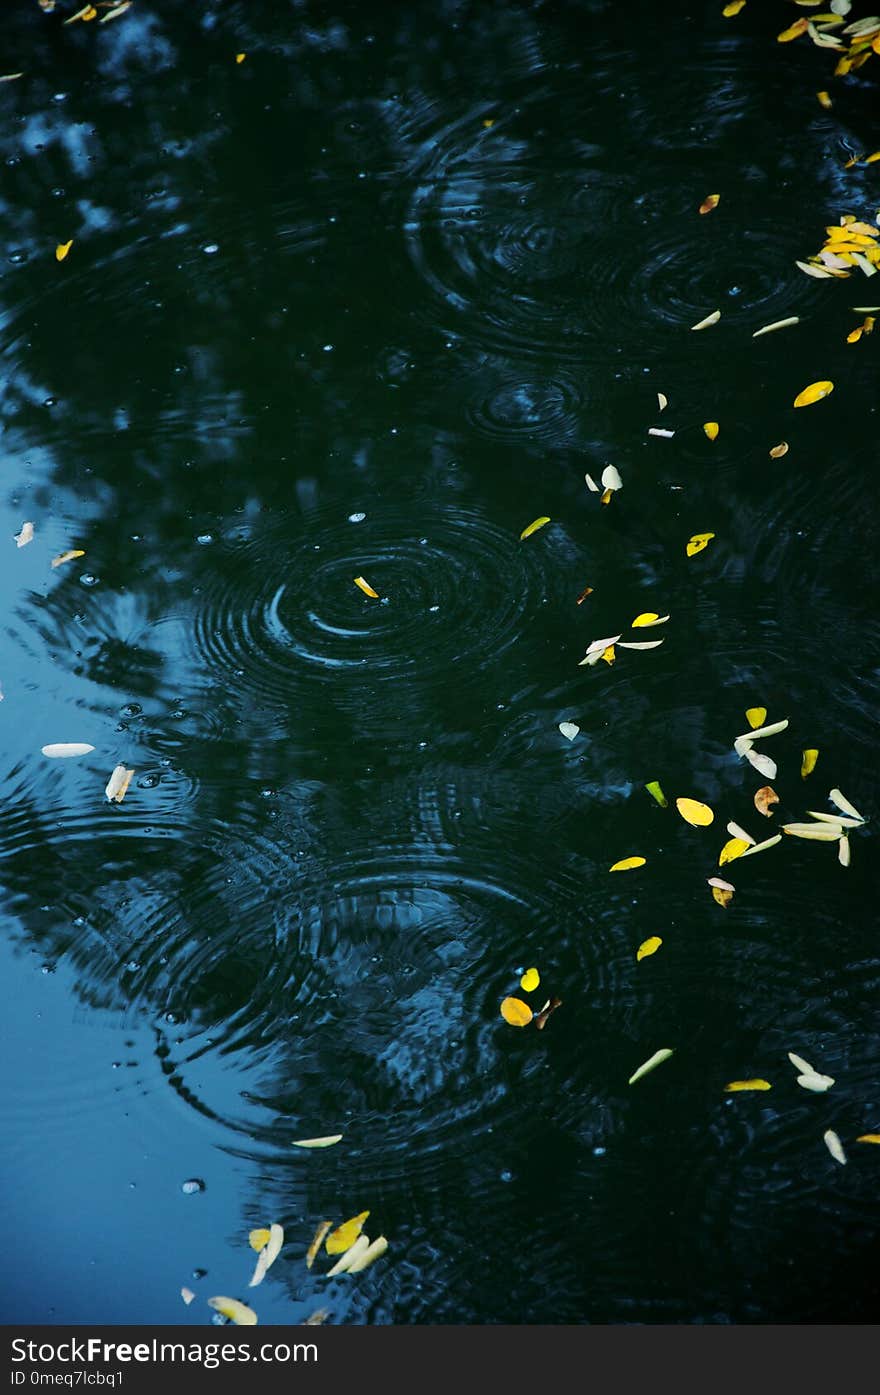 After an autumn rain, yellow leaves falls on the water. There are also reflections of sky, trees and ripples on the water. This picture is full of traditional Chinese aesthetics. Photoed in the Forbidden City, Beijing. After an autumn rain, yellow leaves falls on the water. There are also reflections of sky, trees and ripples on the water. This picture is full of traditional Chinese aesthetics. Photoed in the Forbidden City, Beijing.